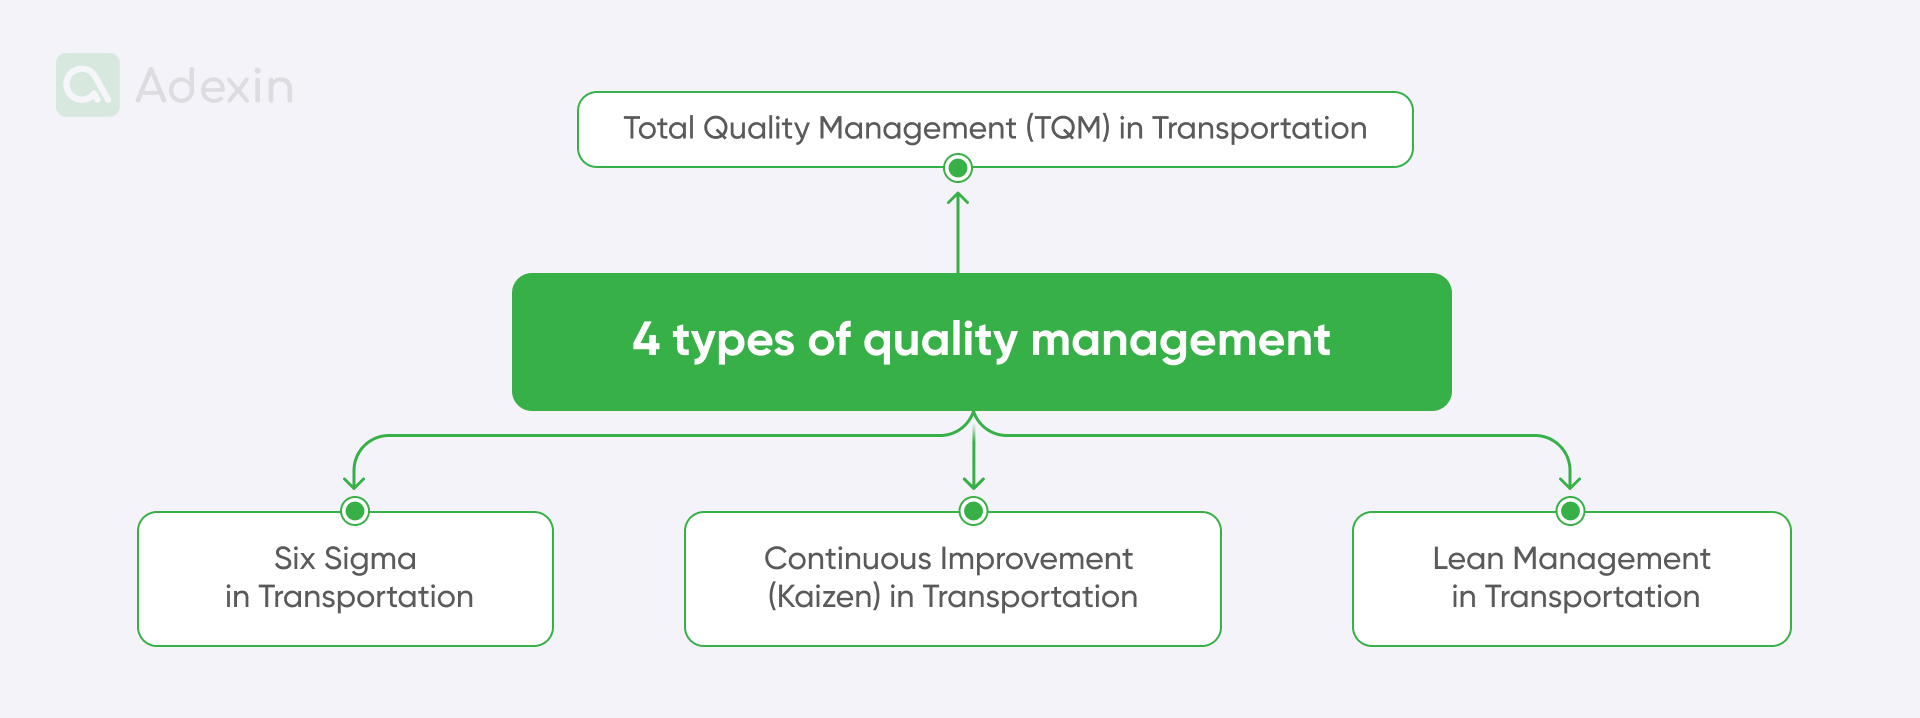 4 types of quality management